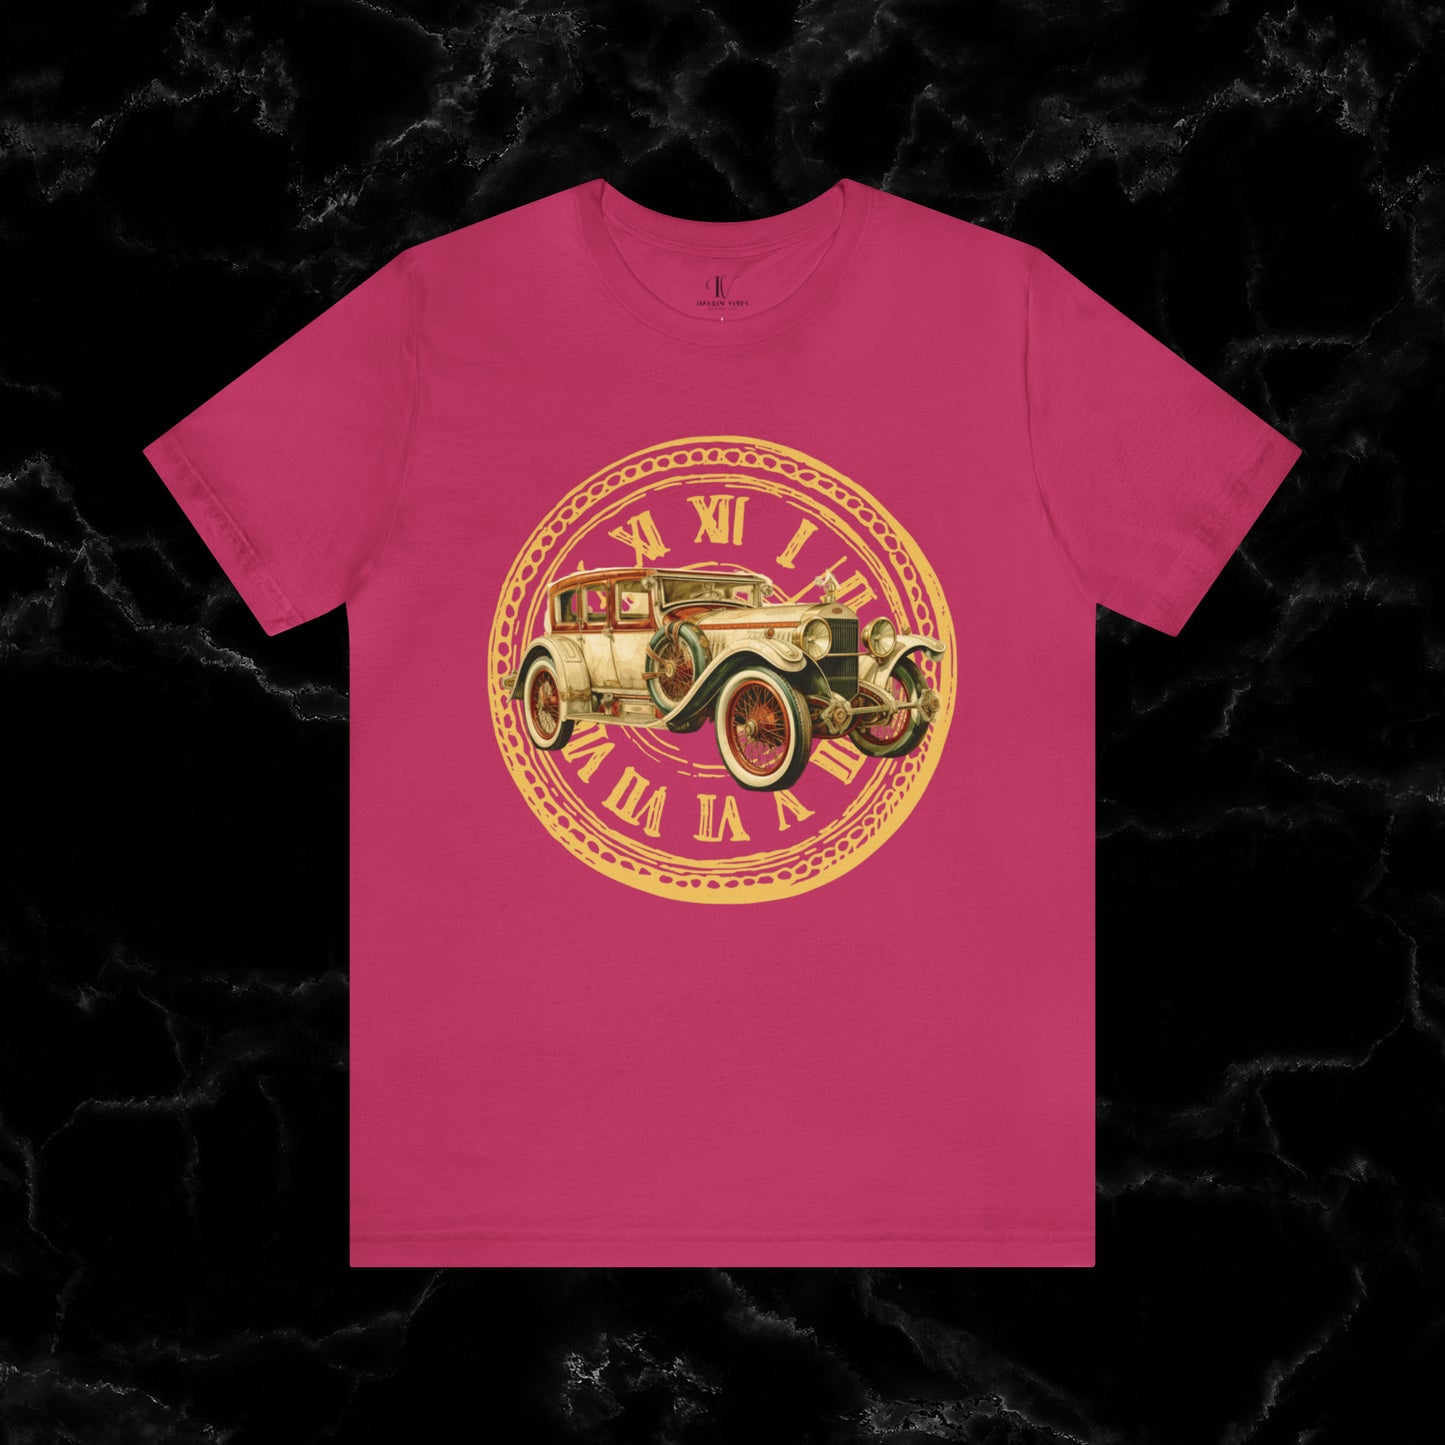 Vintage Car Enthusiast T-Shirt with Classic Wheels and Timeless Appeal T-Shirt Berry S 